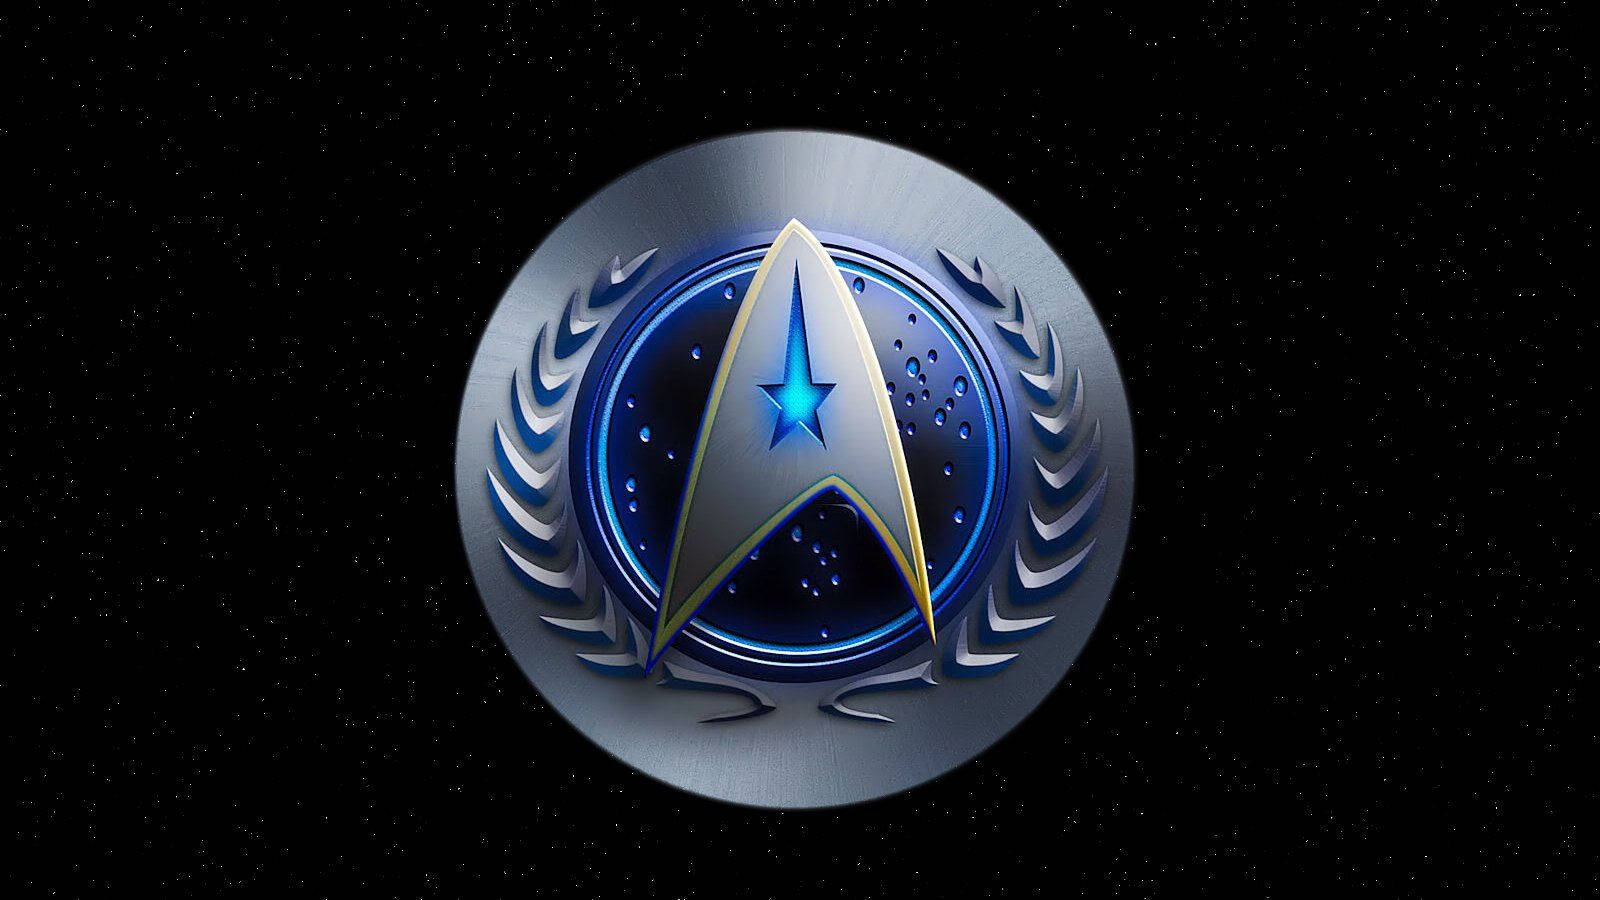 Logo of the United Federation of Planets from Star Trek Wallpaper